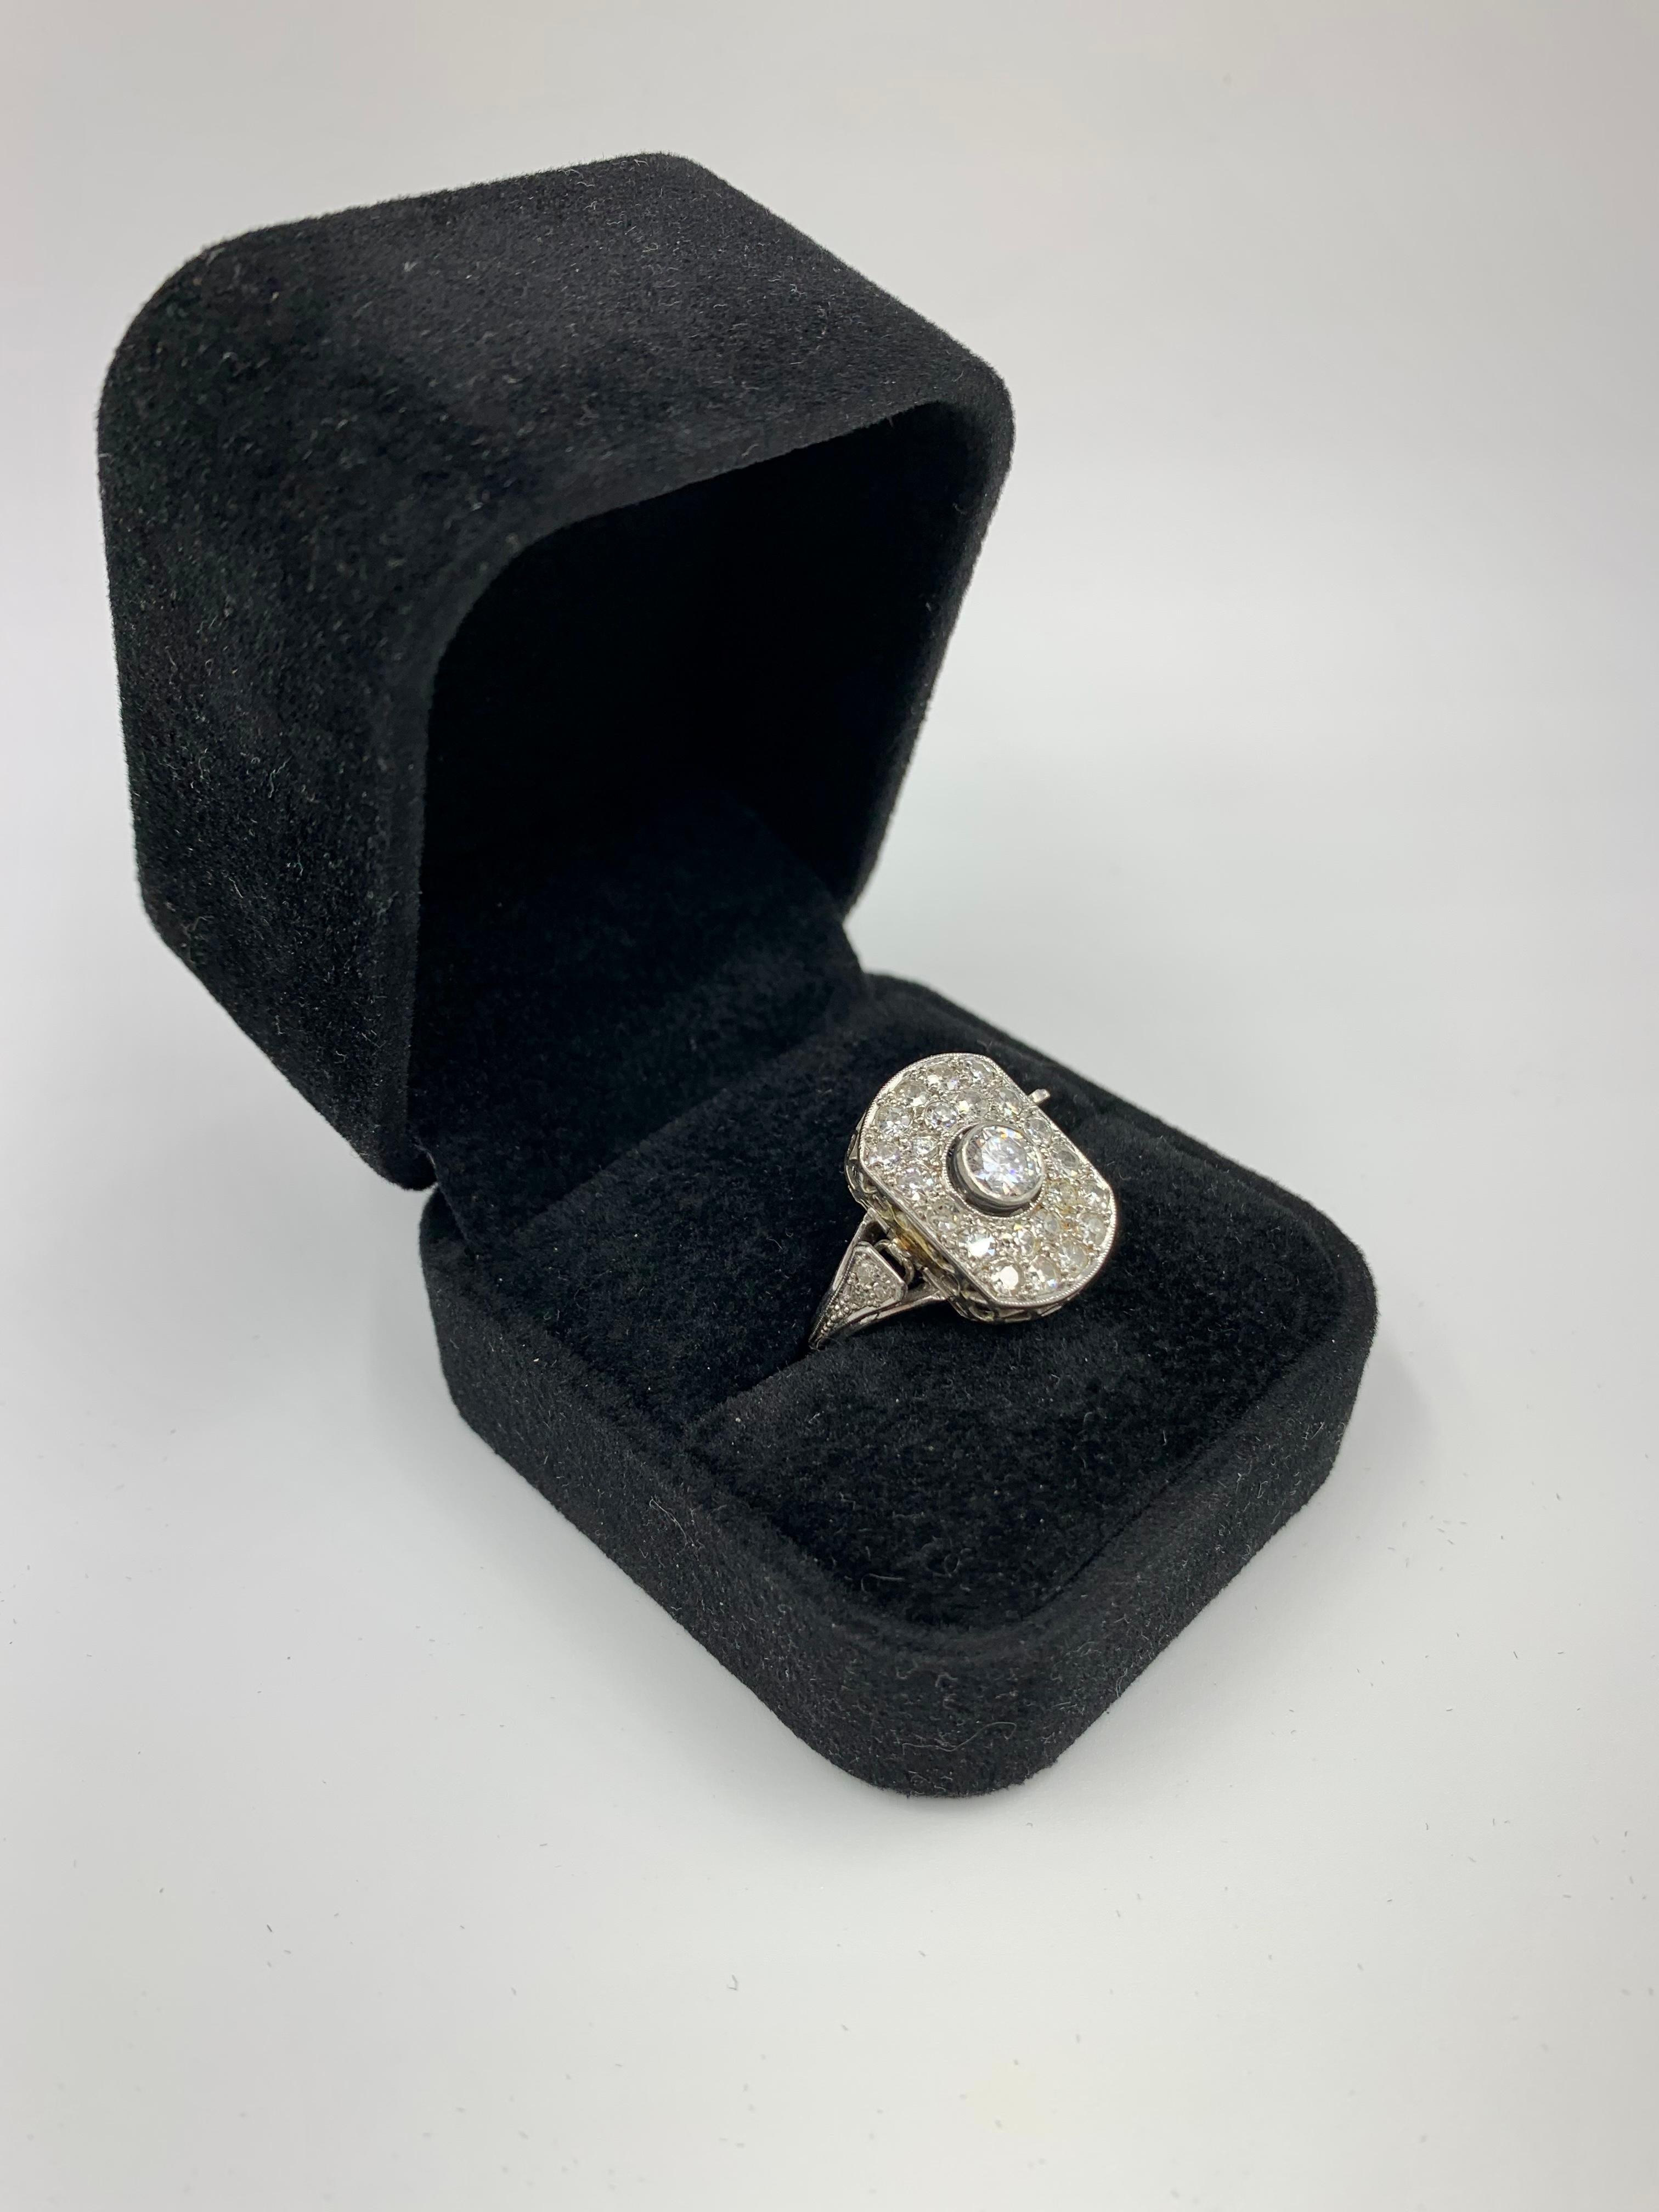 Rare Art Deco 2.30 TCW Diamond 14K White Gold Cocktail Ring with Concealed Watch For Sale 7